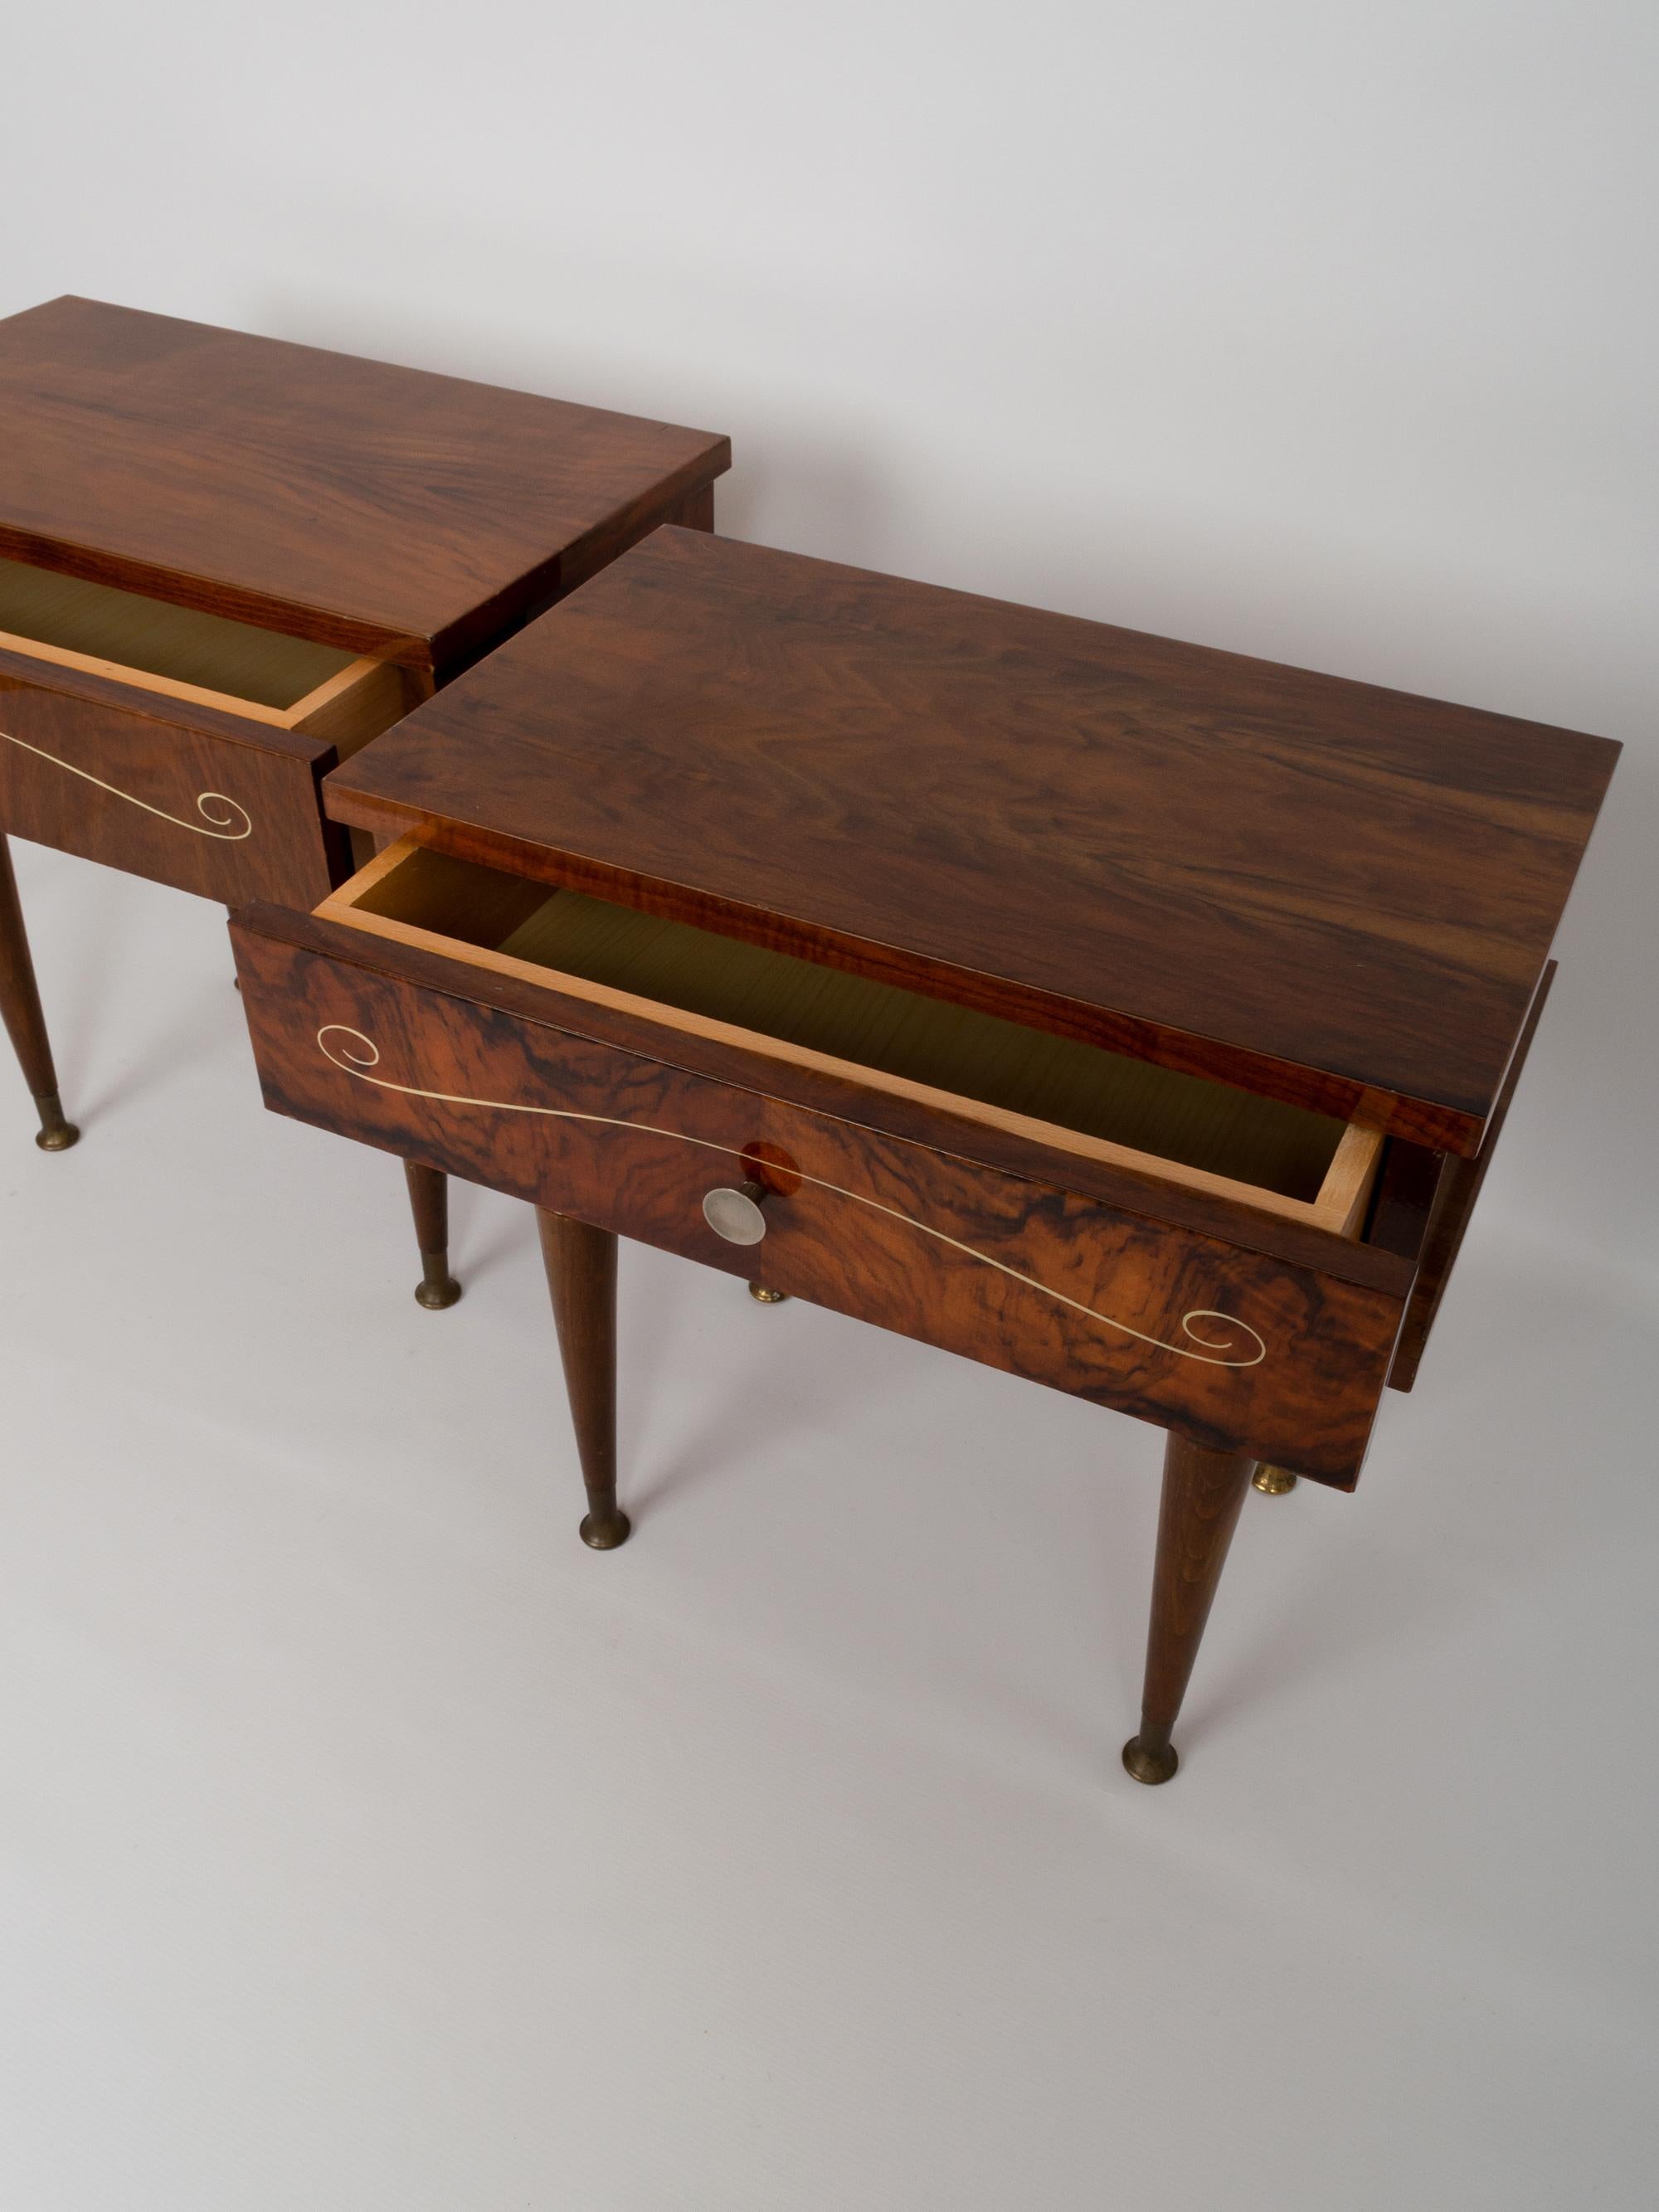 Pair of French Art Deco Figured Walnut Nightstands Bedside Cabinets, circa 1960 In Good Condition For Sale In London, GB